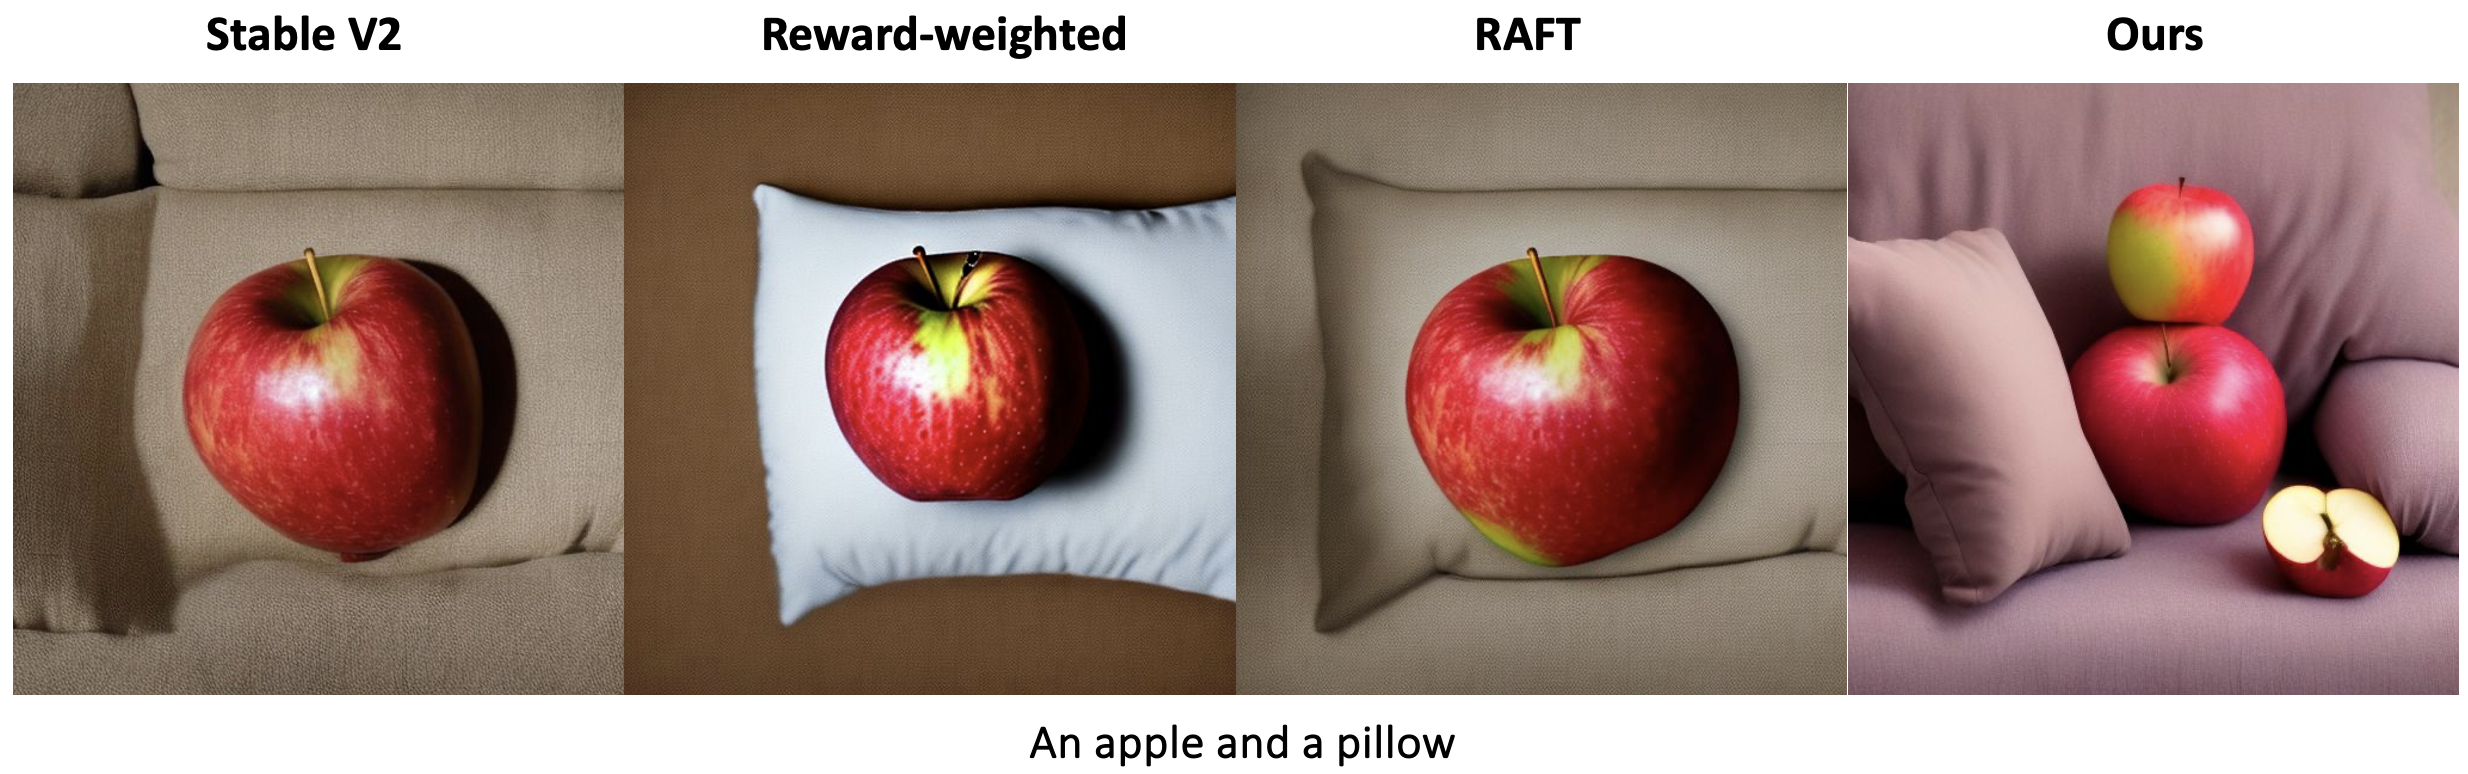 An apple and a pillow.